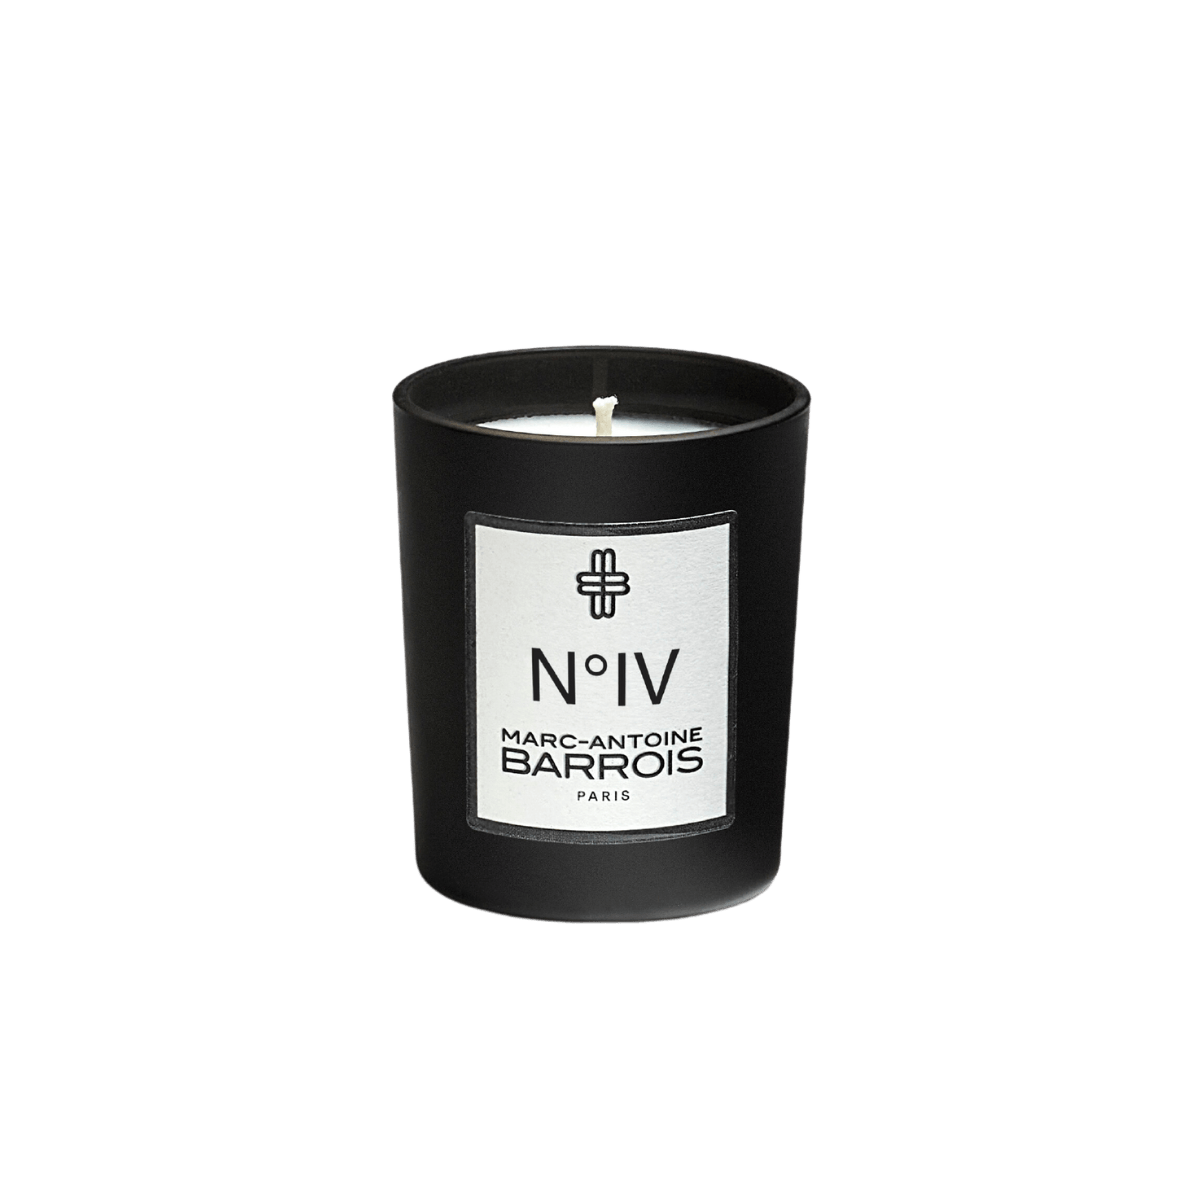 Image of No4 scented candle  by the perfume brand Marc-Antoine Barrois